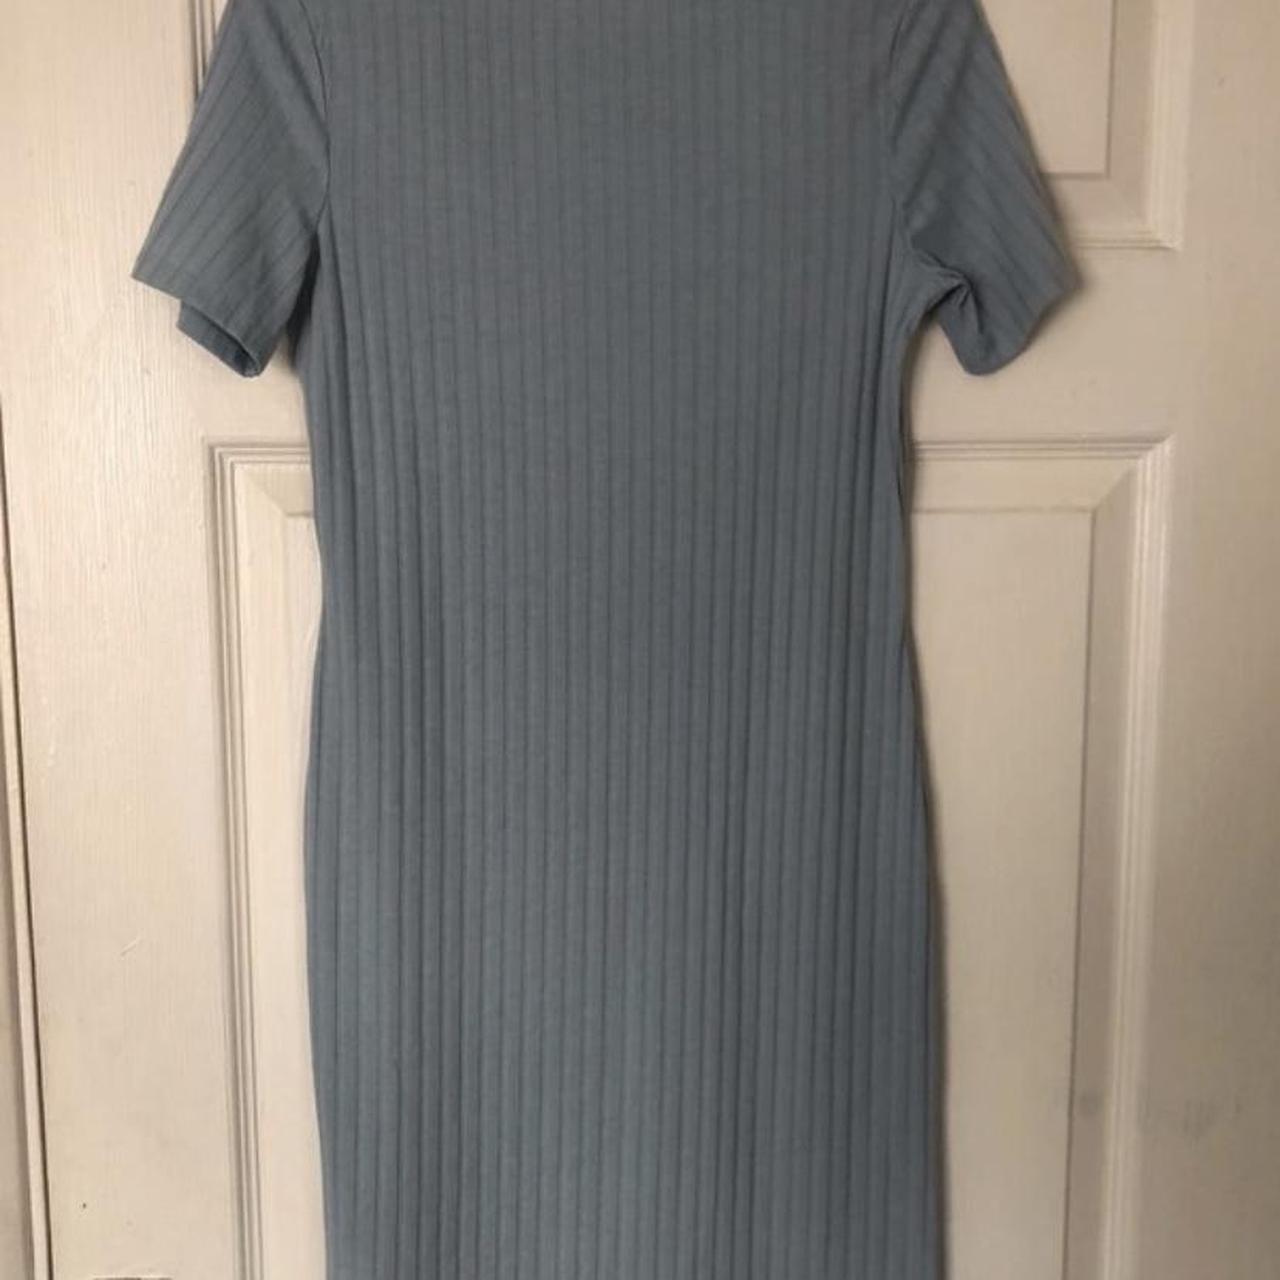 Blue bodycon dress, only worn to try on, without... - Depop